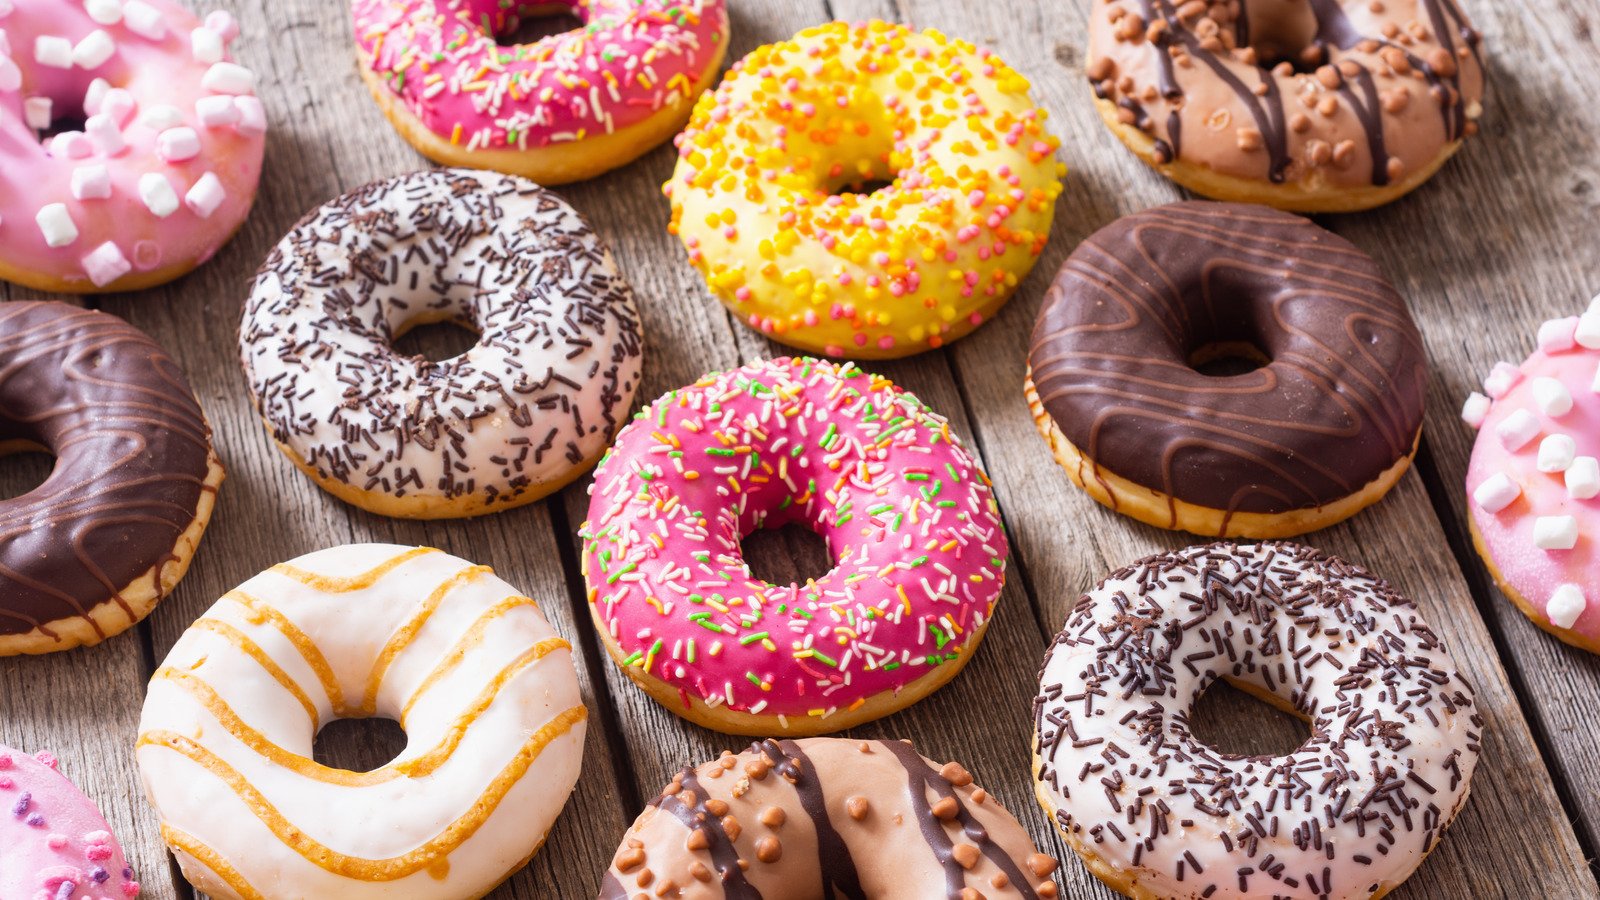 Doughnut Chains Ranked From Worst To Best - Mashed